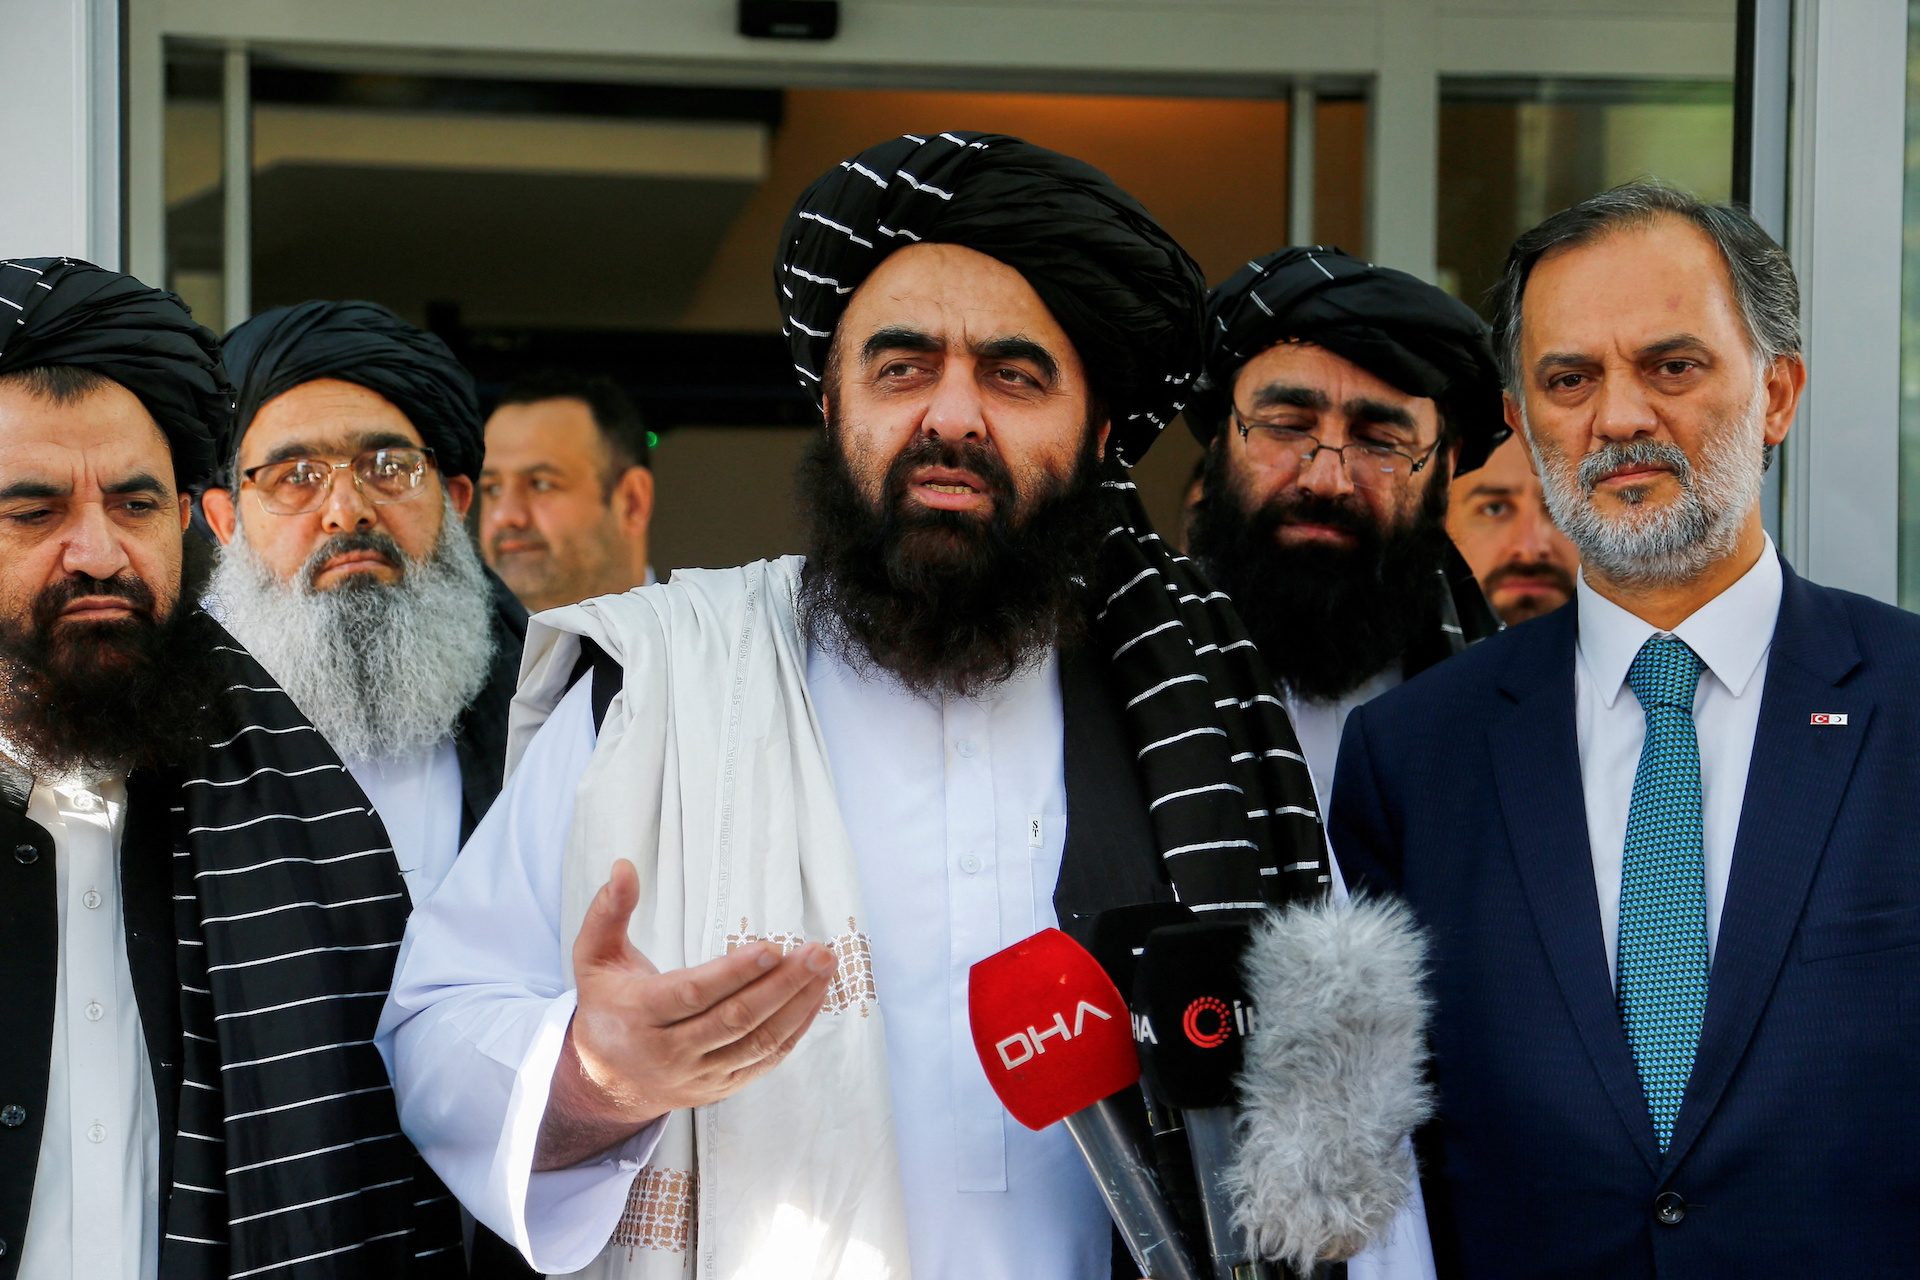 Taliban bars government employees without beards from work  – sources